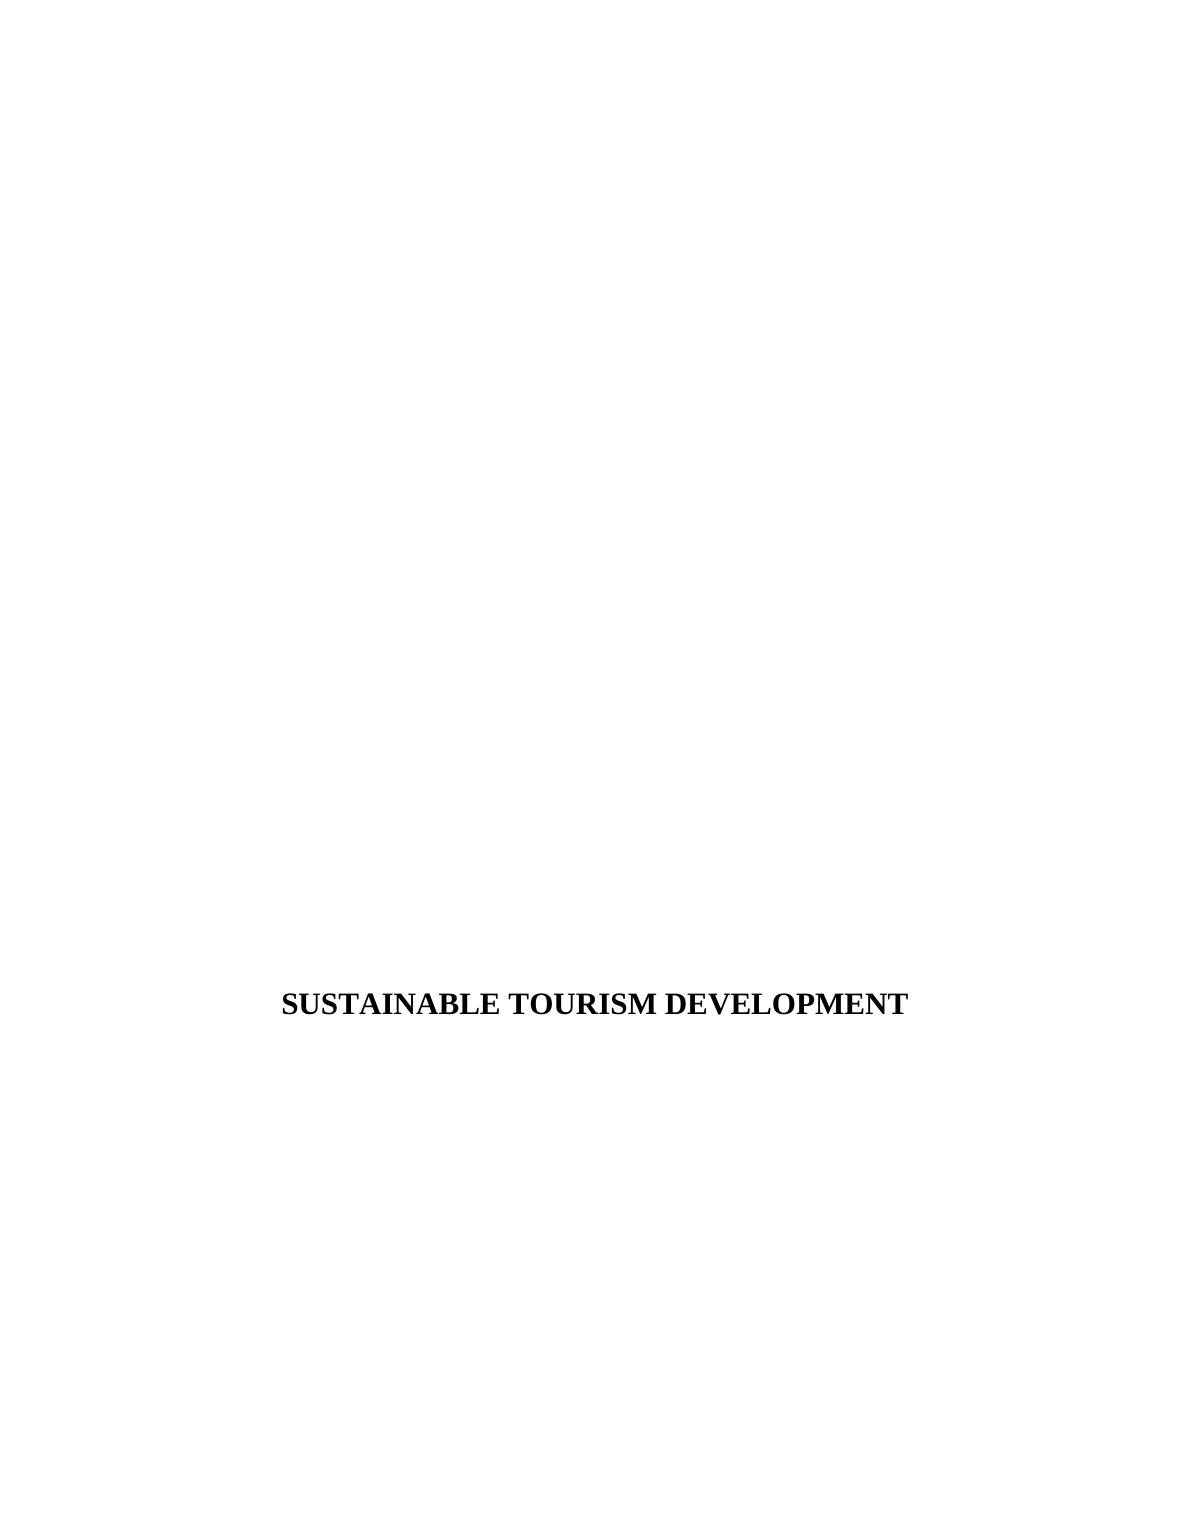 SUSTAINABLE TOURISM DEVELOPMENT Table of contents Introduction_1